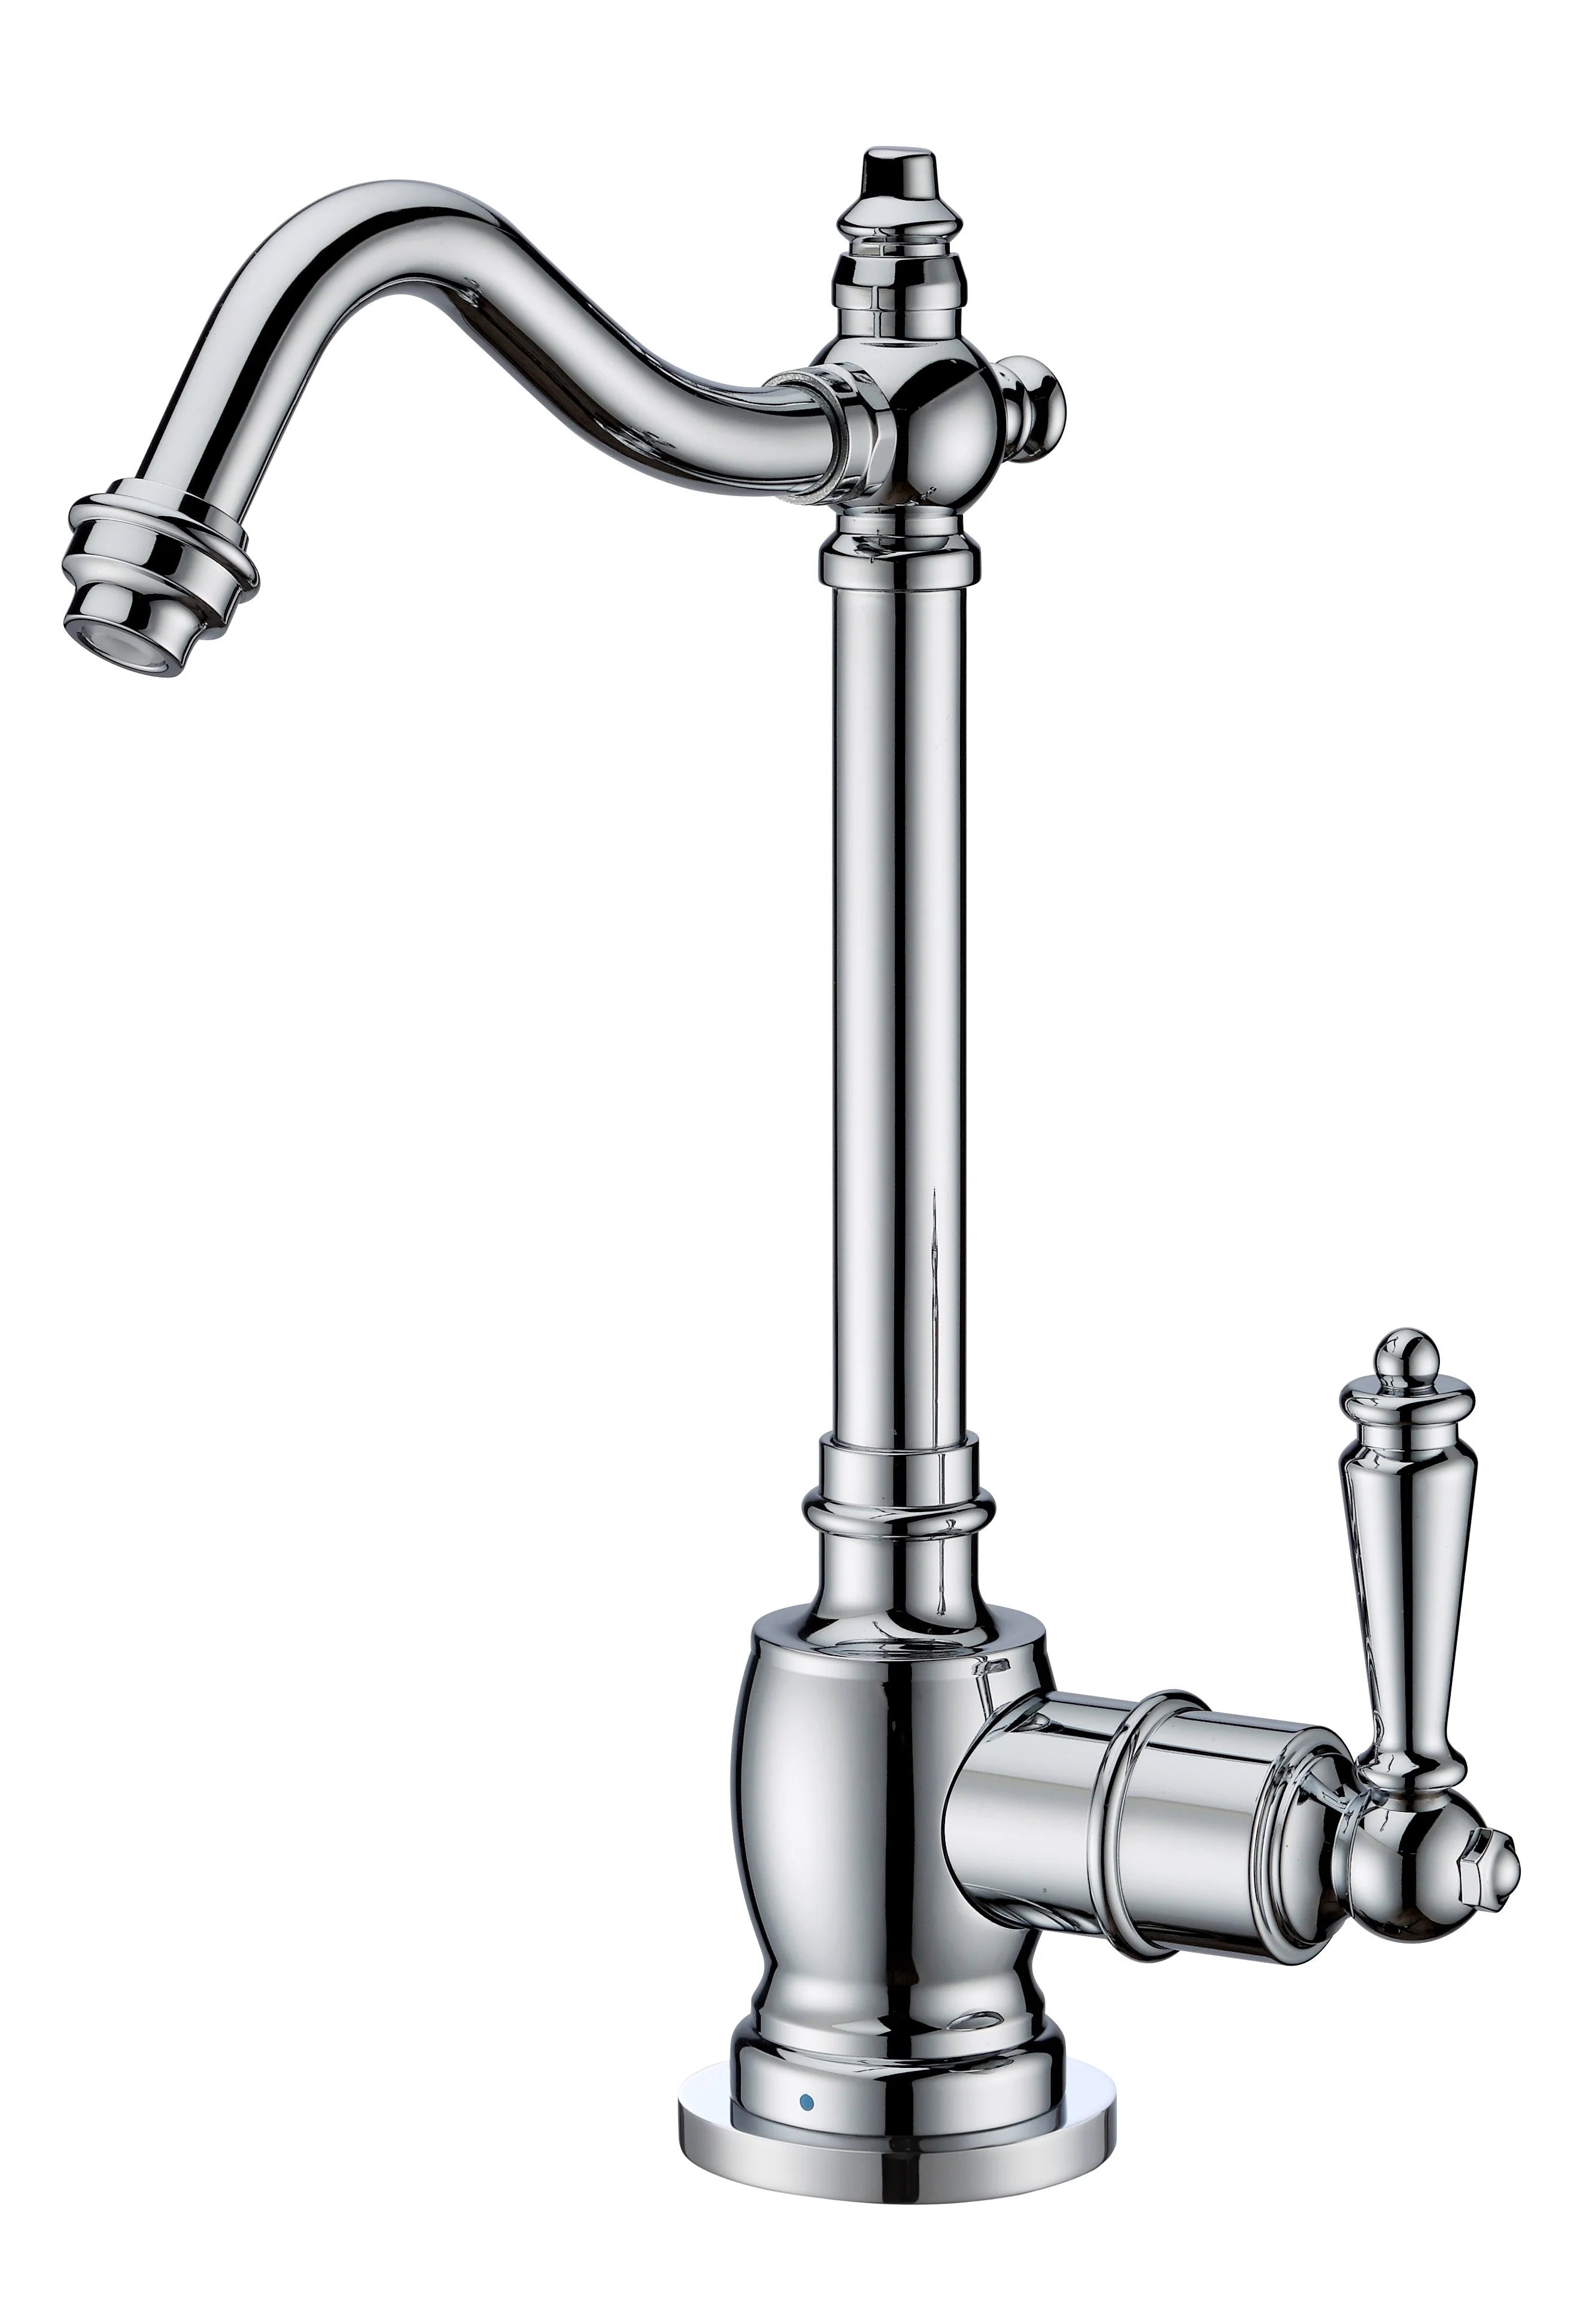 Whitehaus POINT OF USE COLD WATER DRINKING FAUCET WITH TRADITIONAL SWIVEL SPOUT - WHFH-C1006